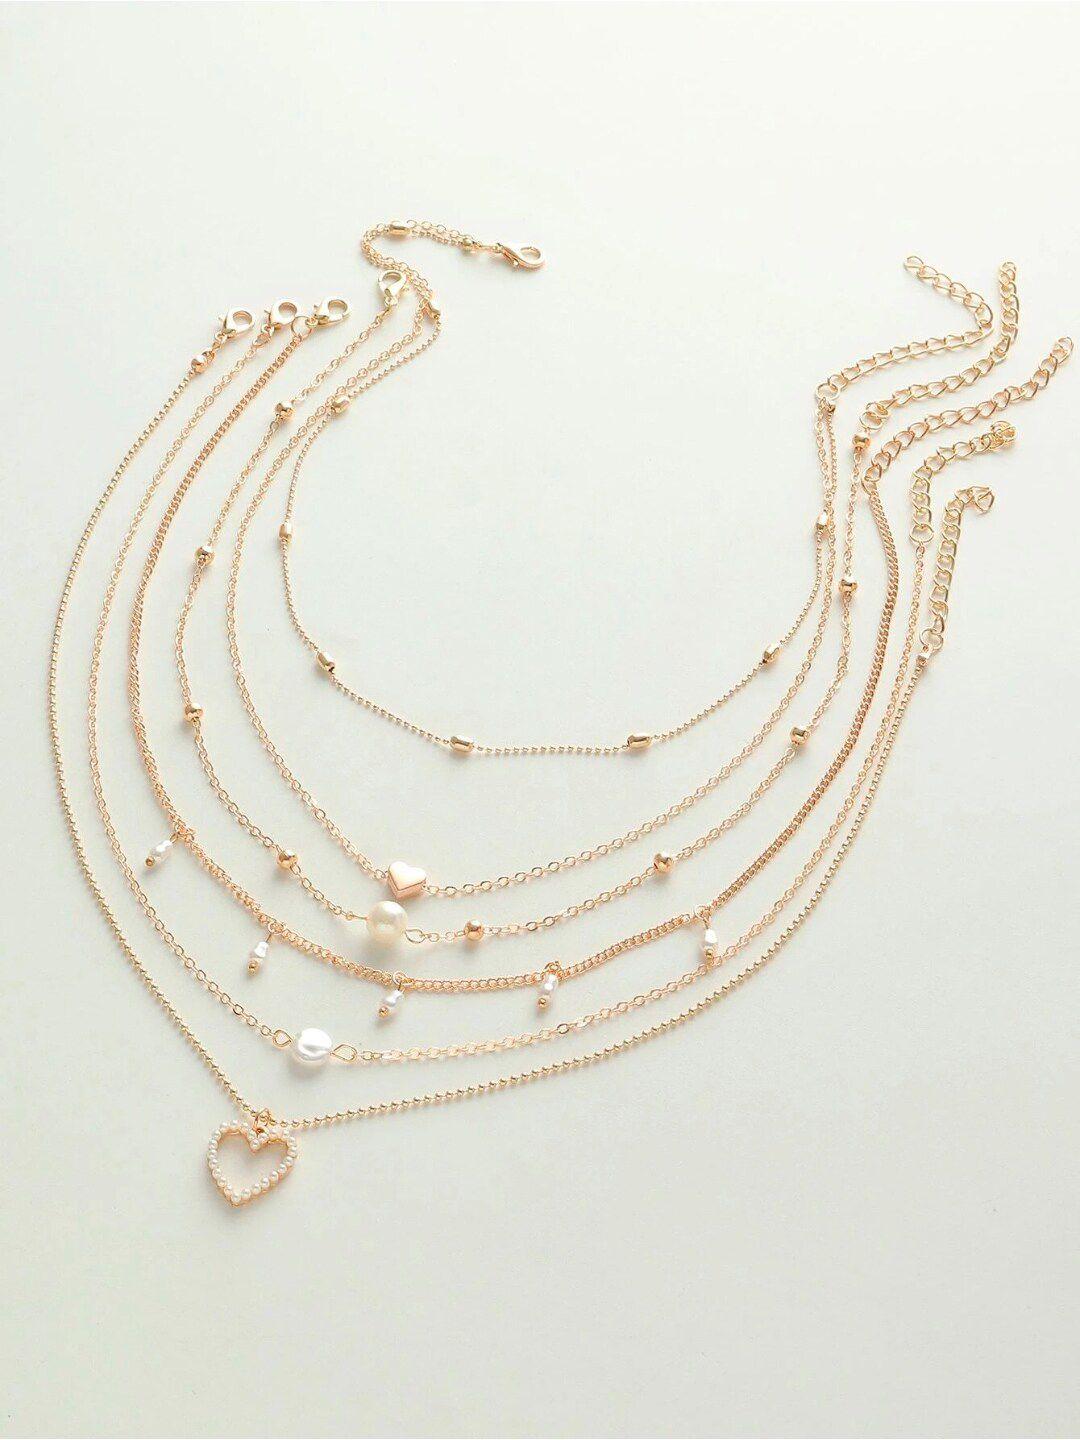 oomph set of 5 gold-toned & white necklace